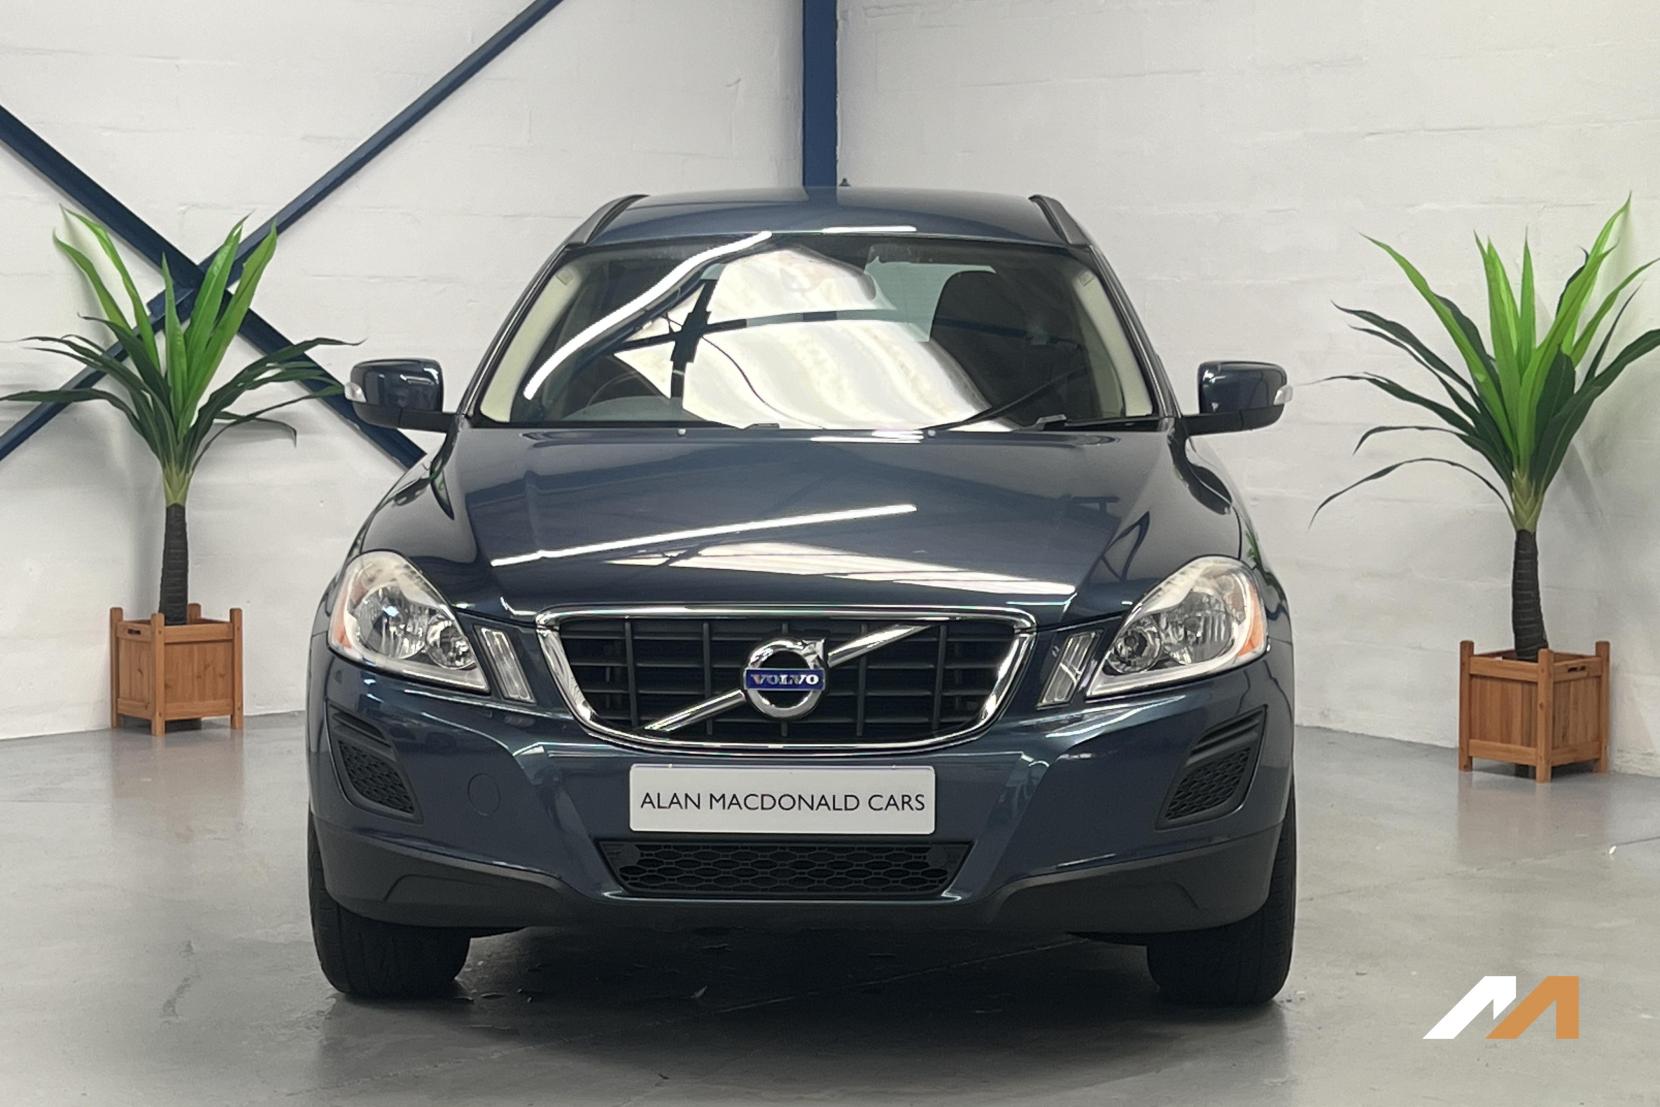 Volvo XC60 2.0 D3 DRIVe ES SUV 5dr Diesel Manual Euro 5 (s/s) (163 ps)